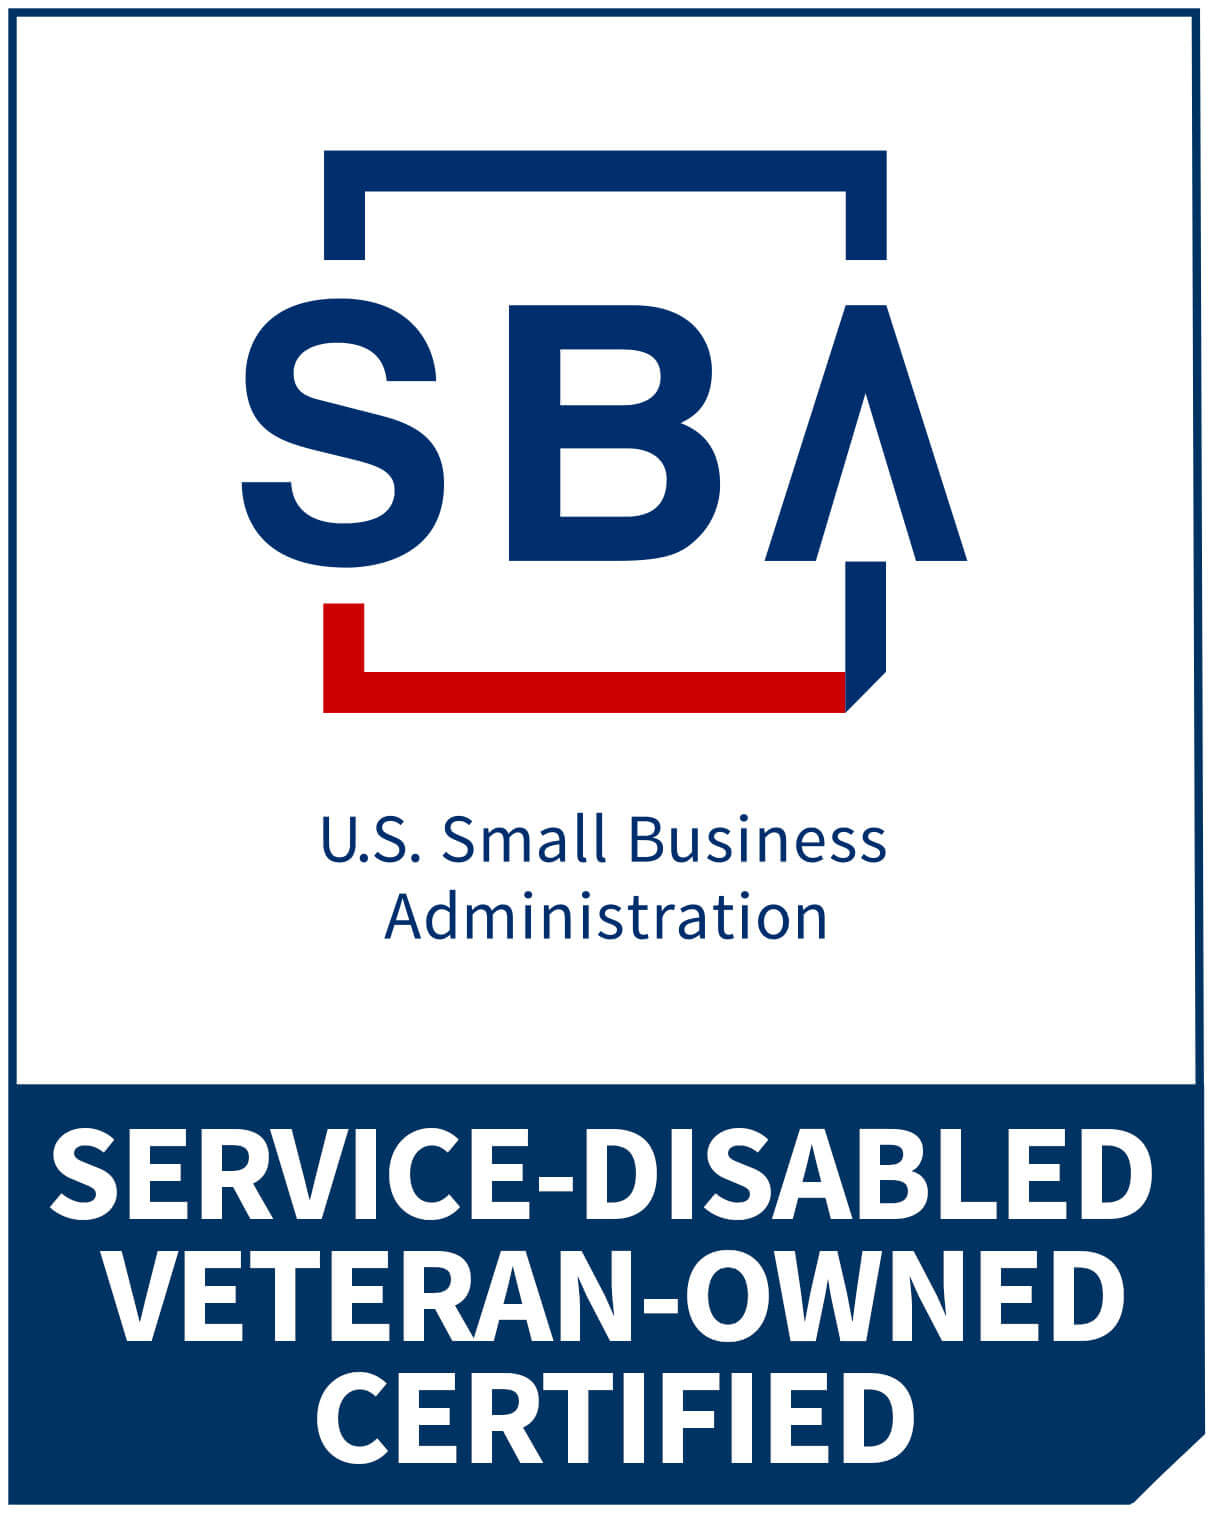 service-dsiabled veteran-owned certified